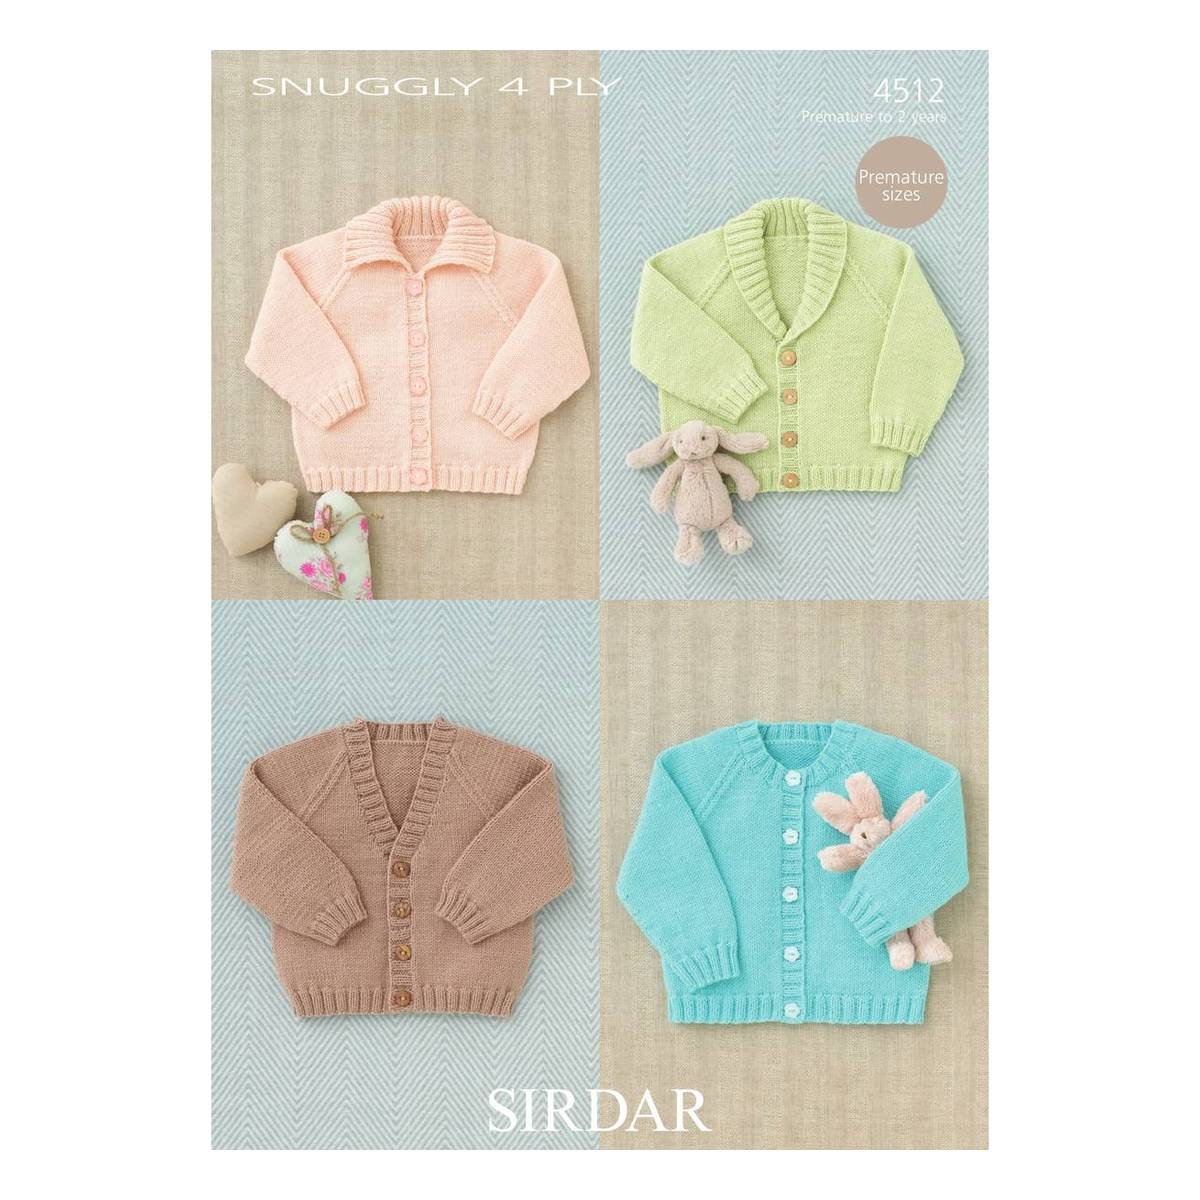 Sirdar Pattern 4512 Baby Cardigans in Snuggly 4Ply